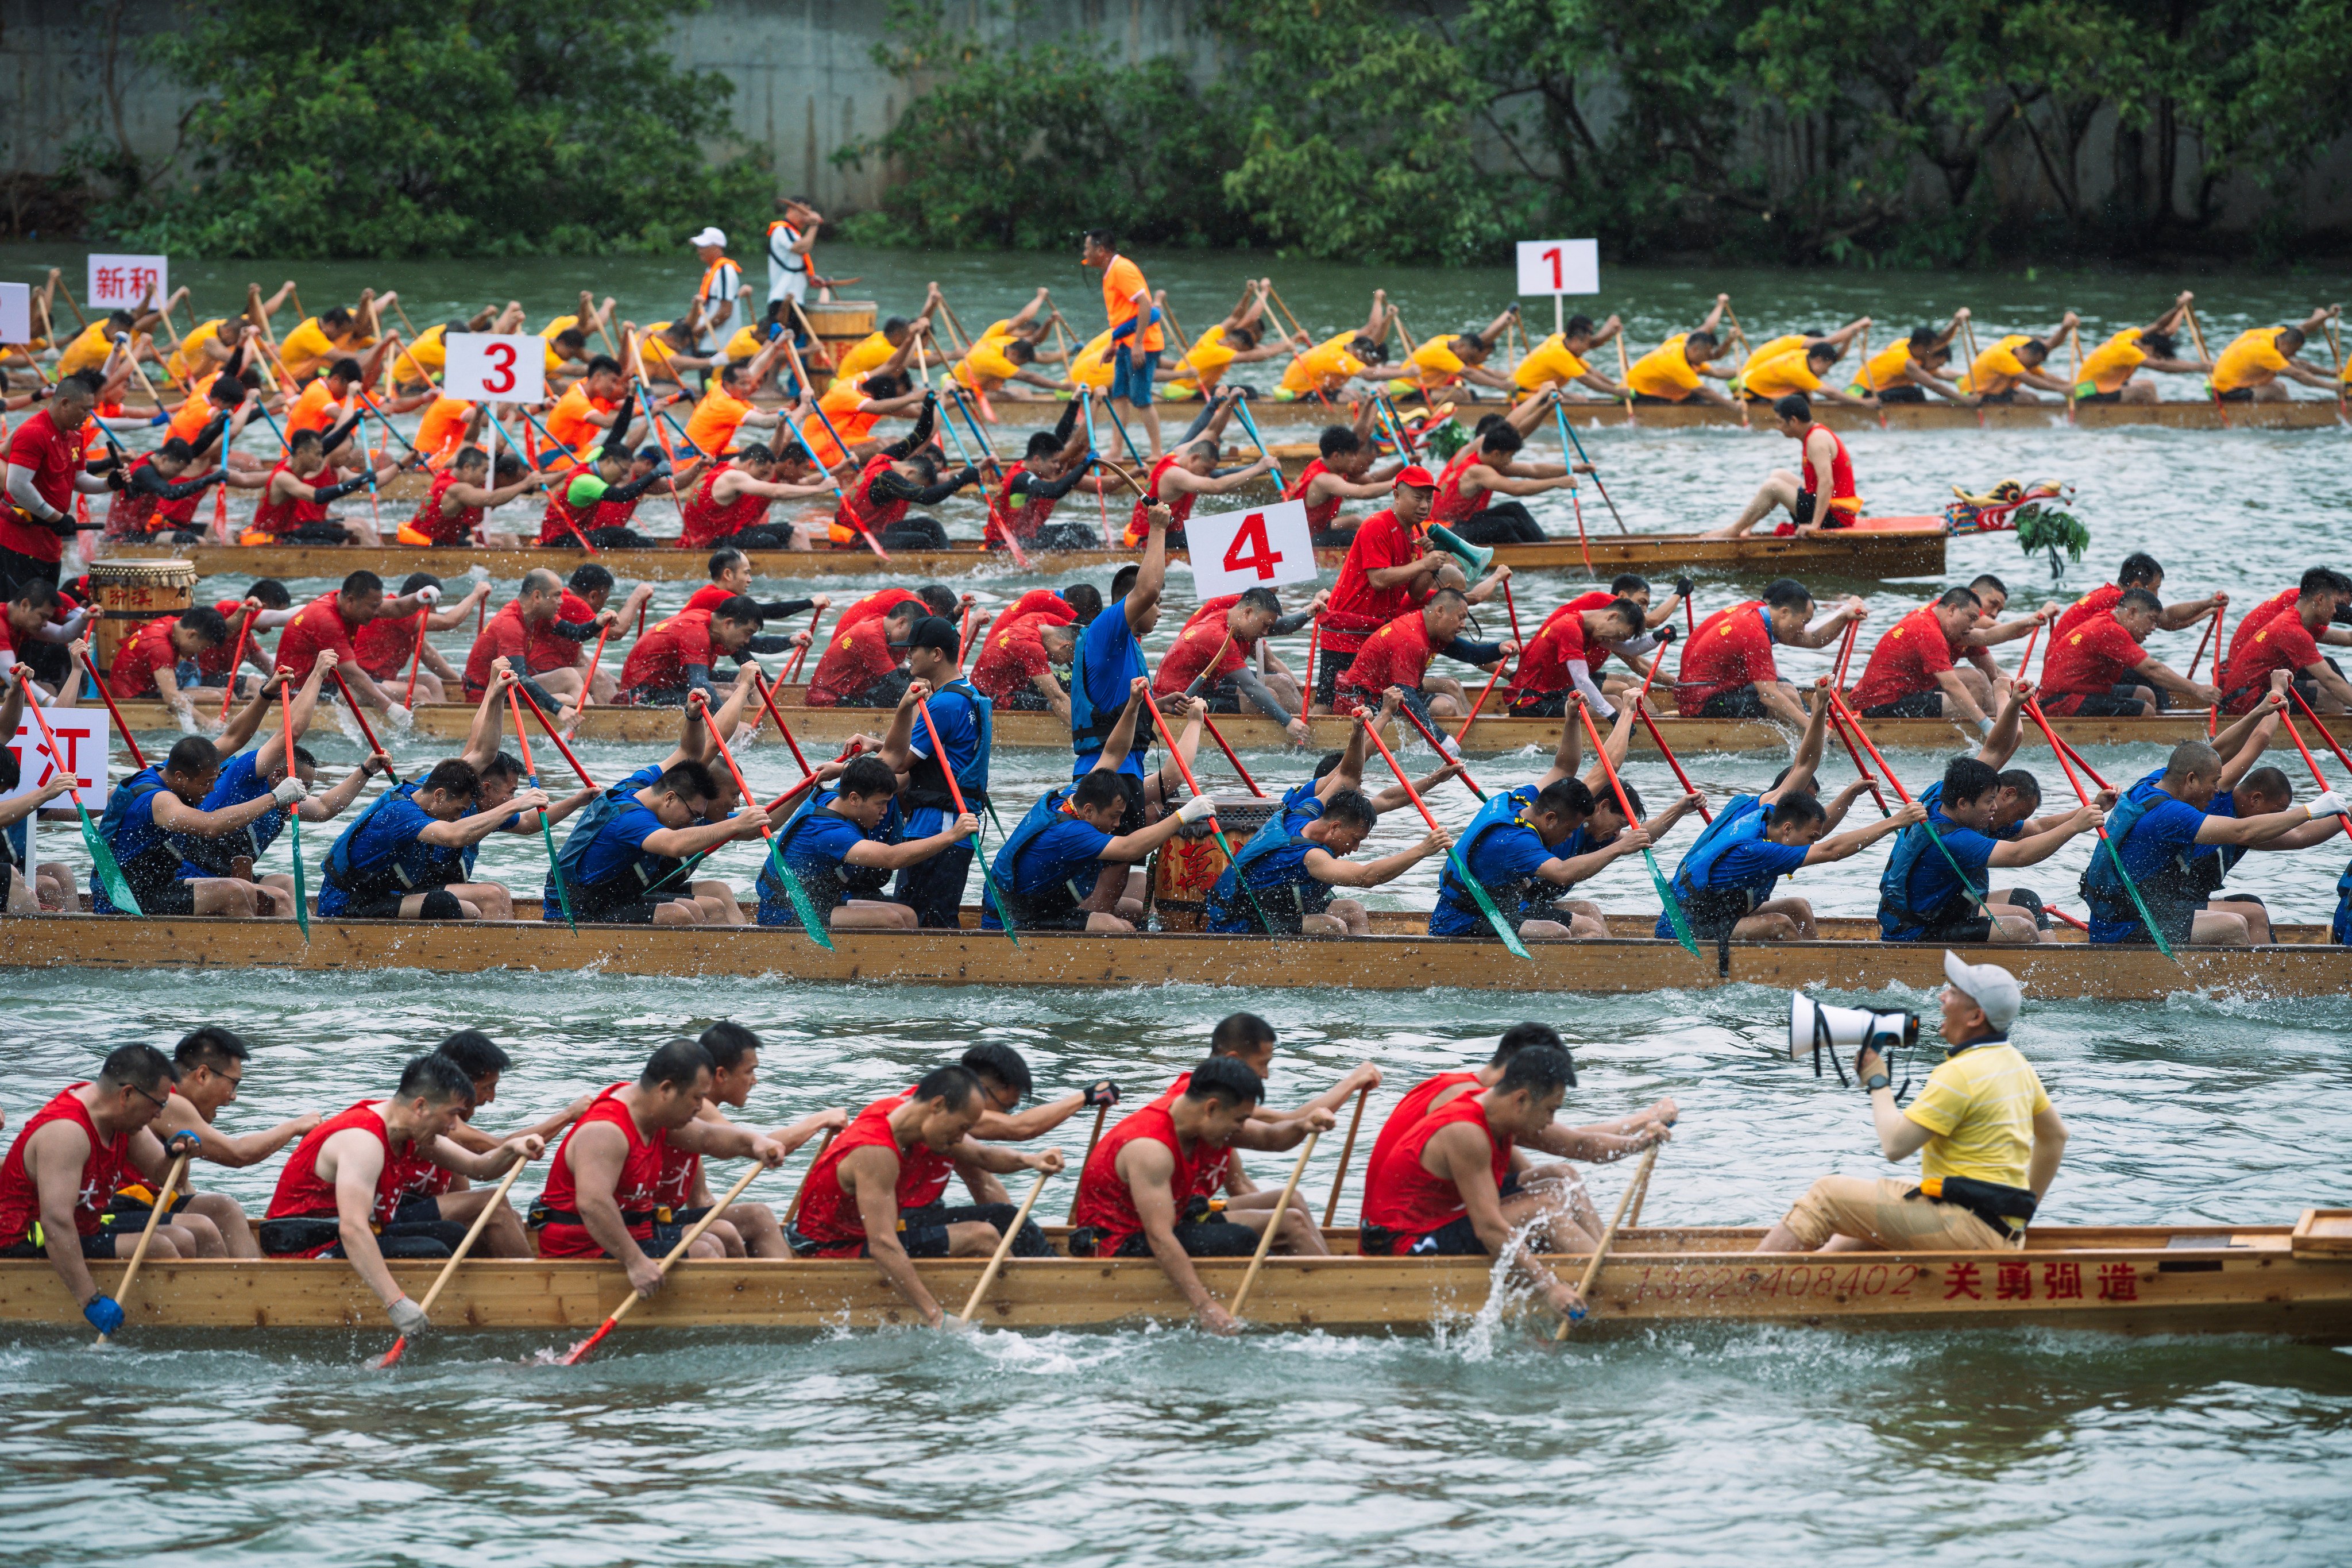 Return of the dragon: Hong Kong welcomes back drum beats and crowds for  Dragon Boat Festival, but race turnout still below pre-pandemic levels